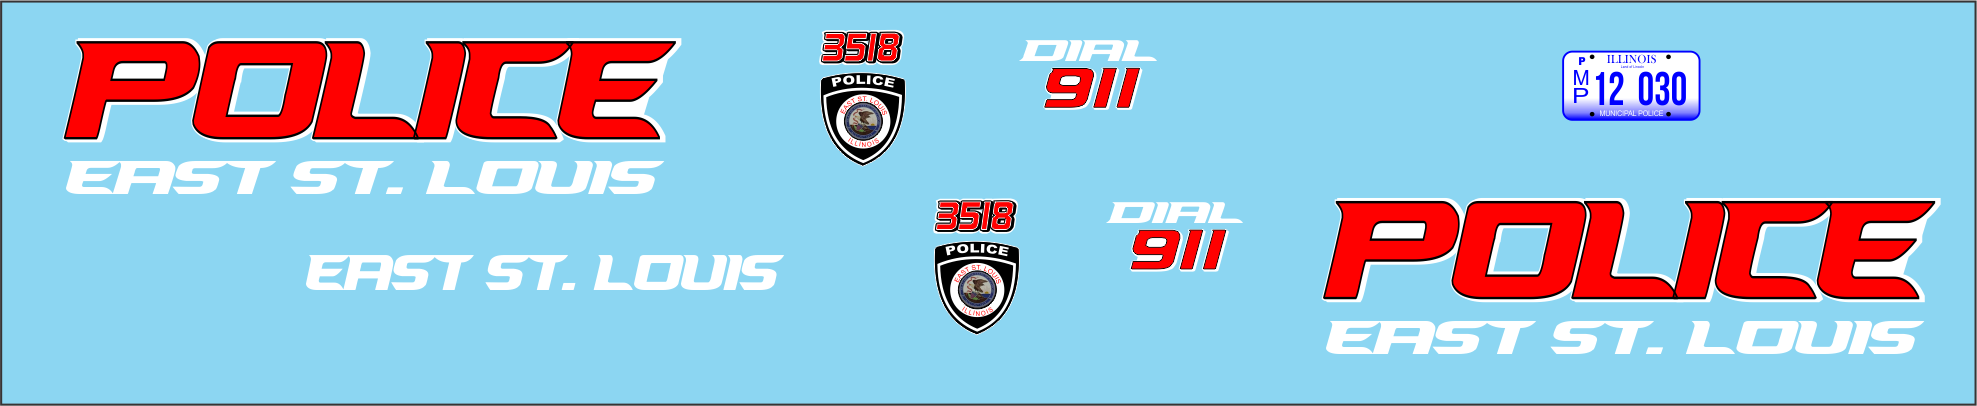 East St. Louis, Illinois Police Department 1/24-1/25 waterslide decals